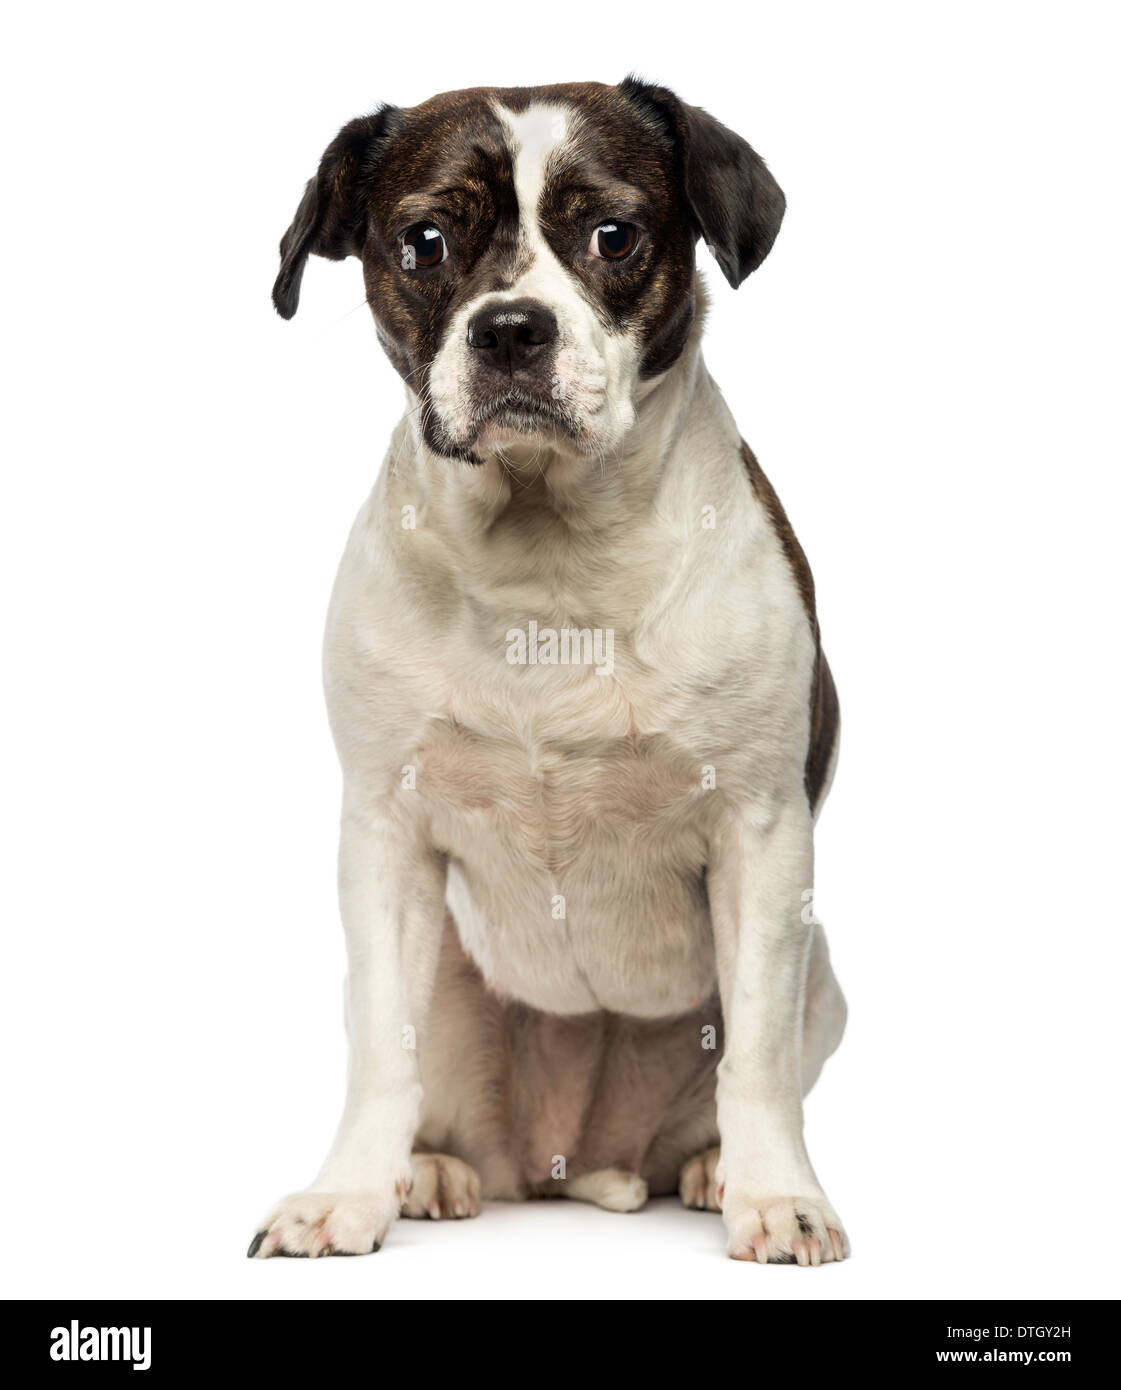 Front view of a Crossbreed dog sitting, looking at the camera against white background Stock Photo